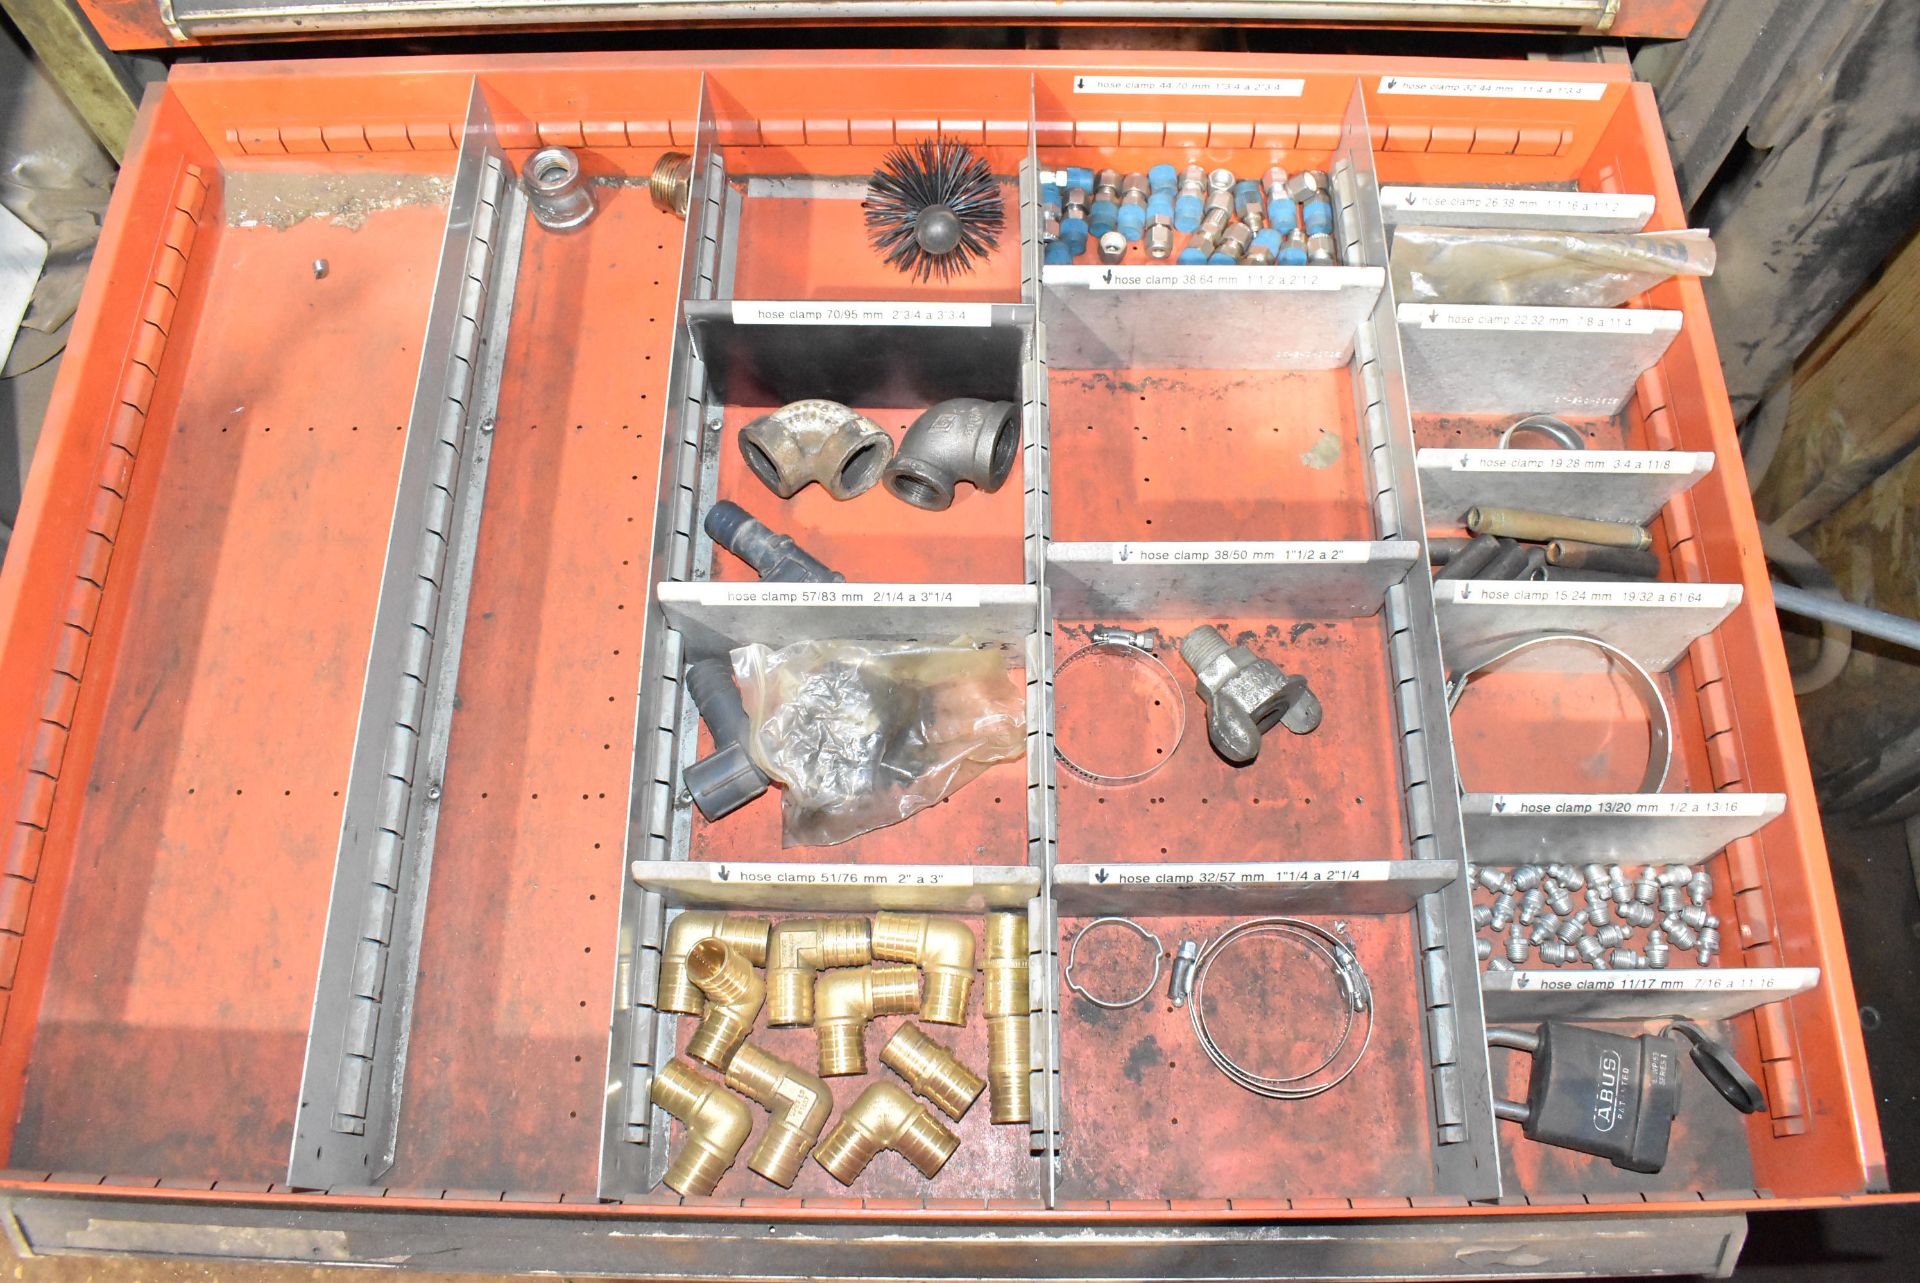 LOT/ CONTENTS OF TOOL CABINET - INCLUDING FITTINGS, FITTING CLAMPS, SPARE PARTS, TAPS & DIES, - Image 11 of 14